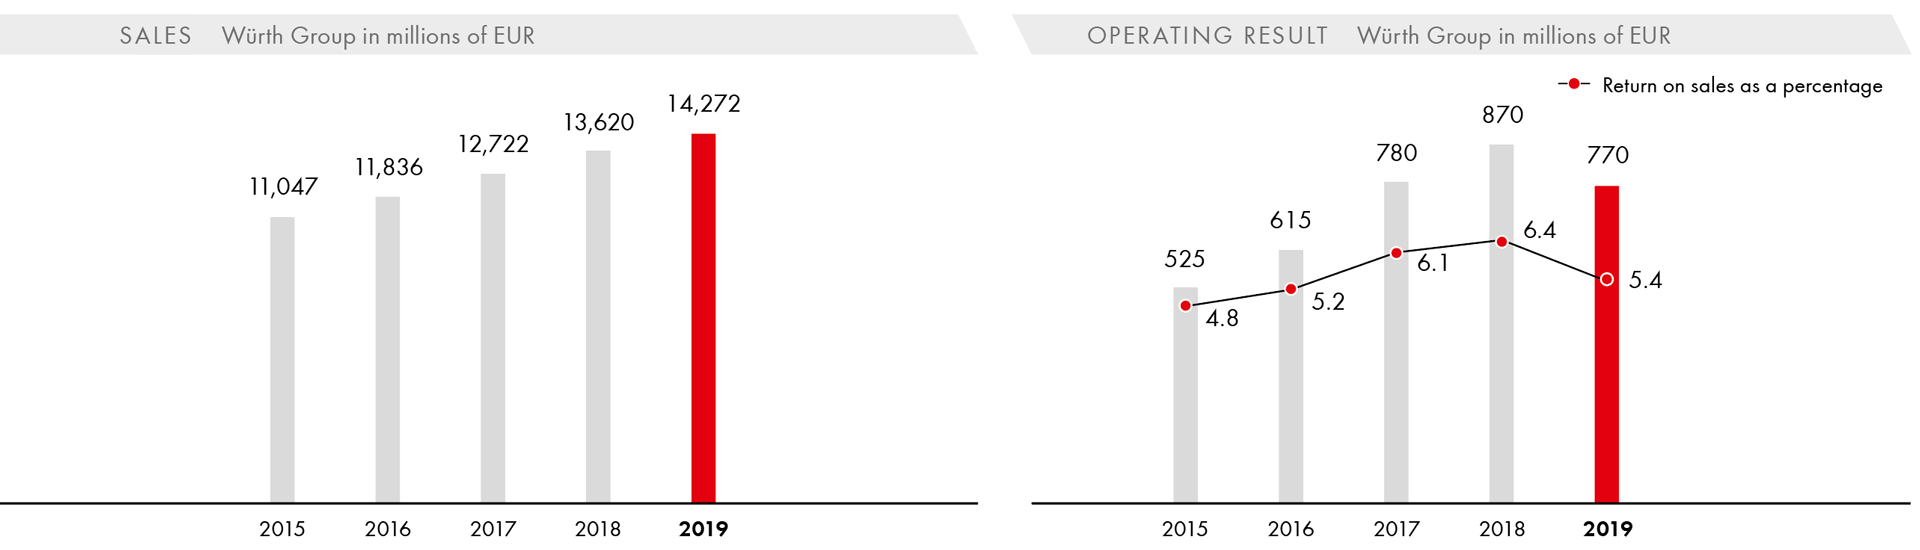 Sales of the Würth Group in 2019